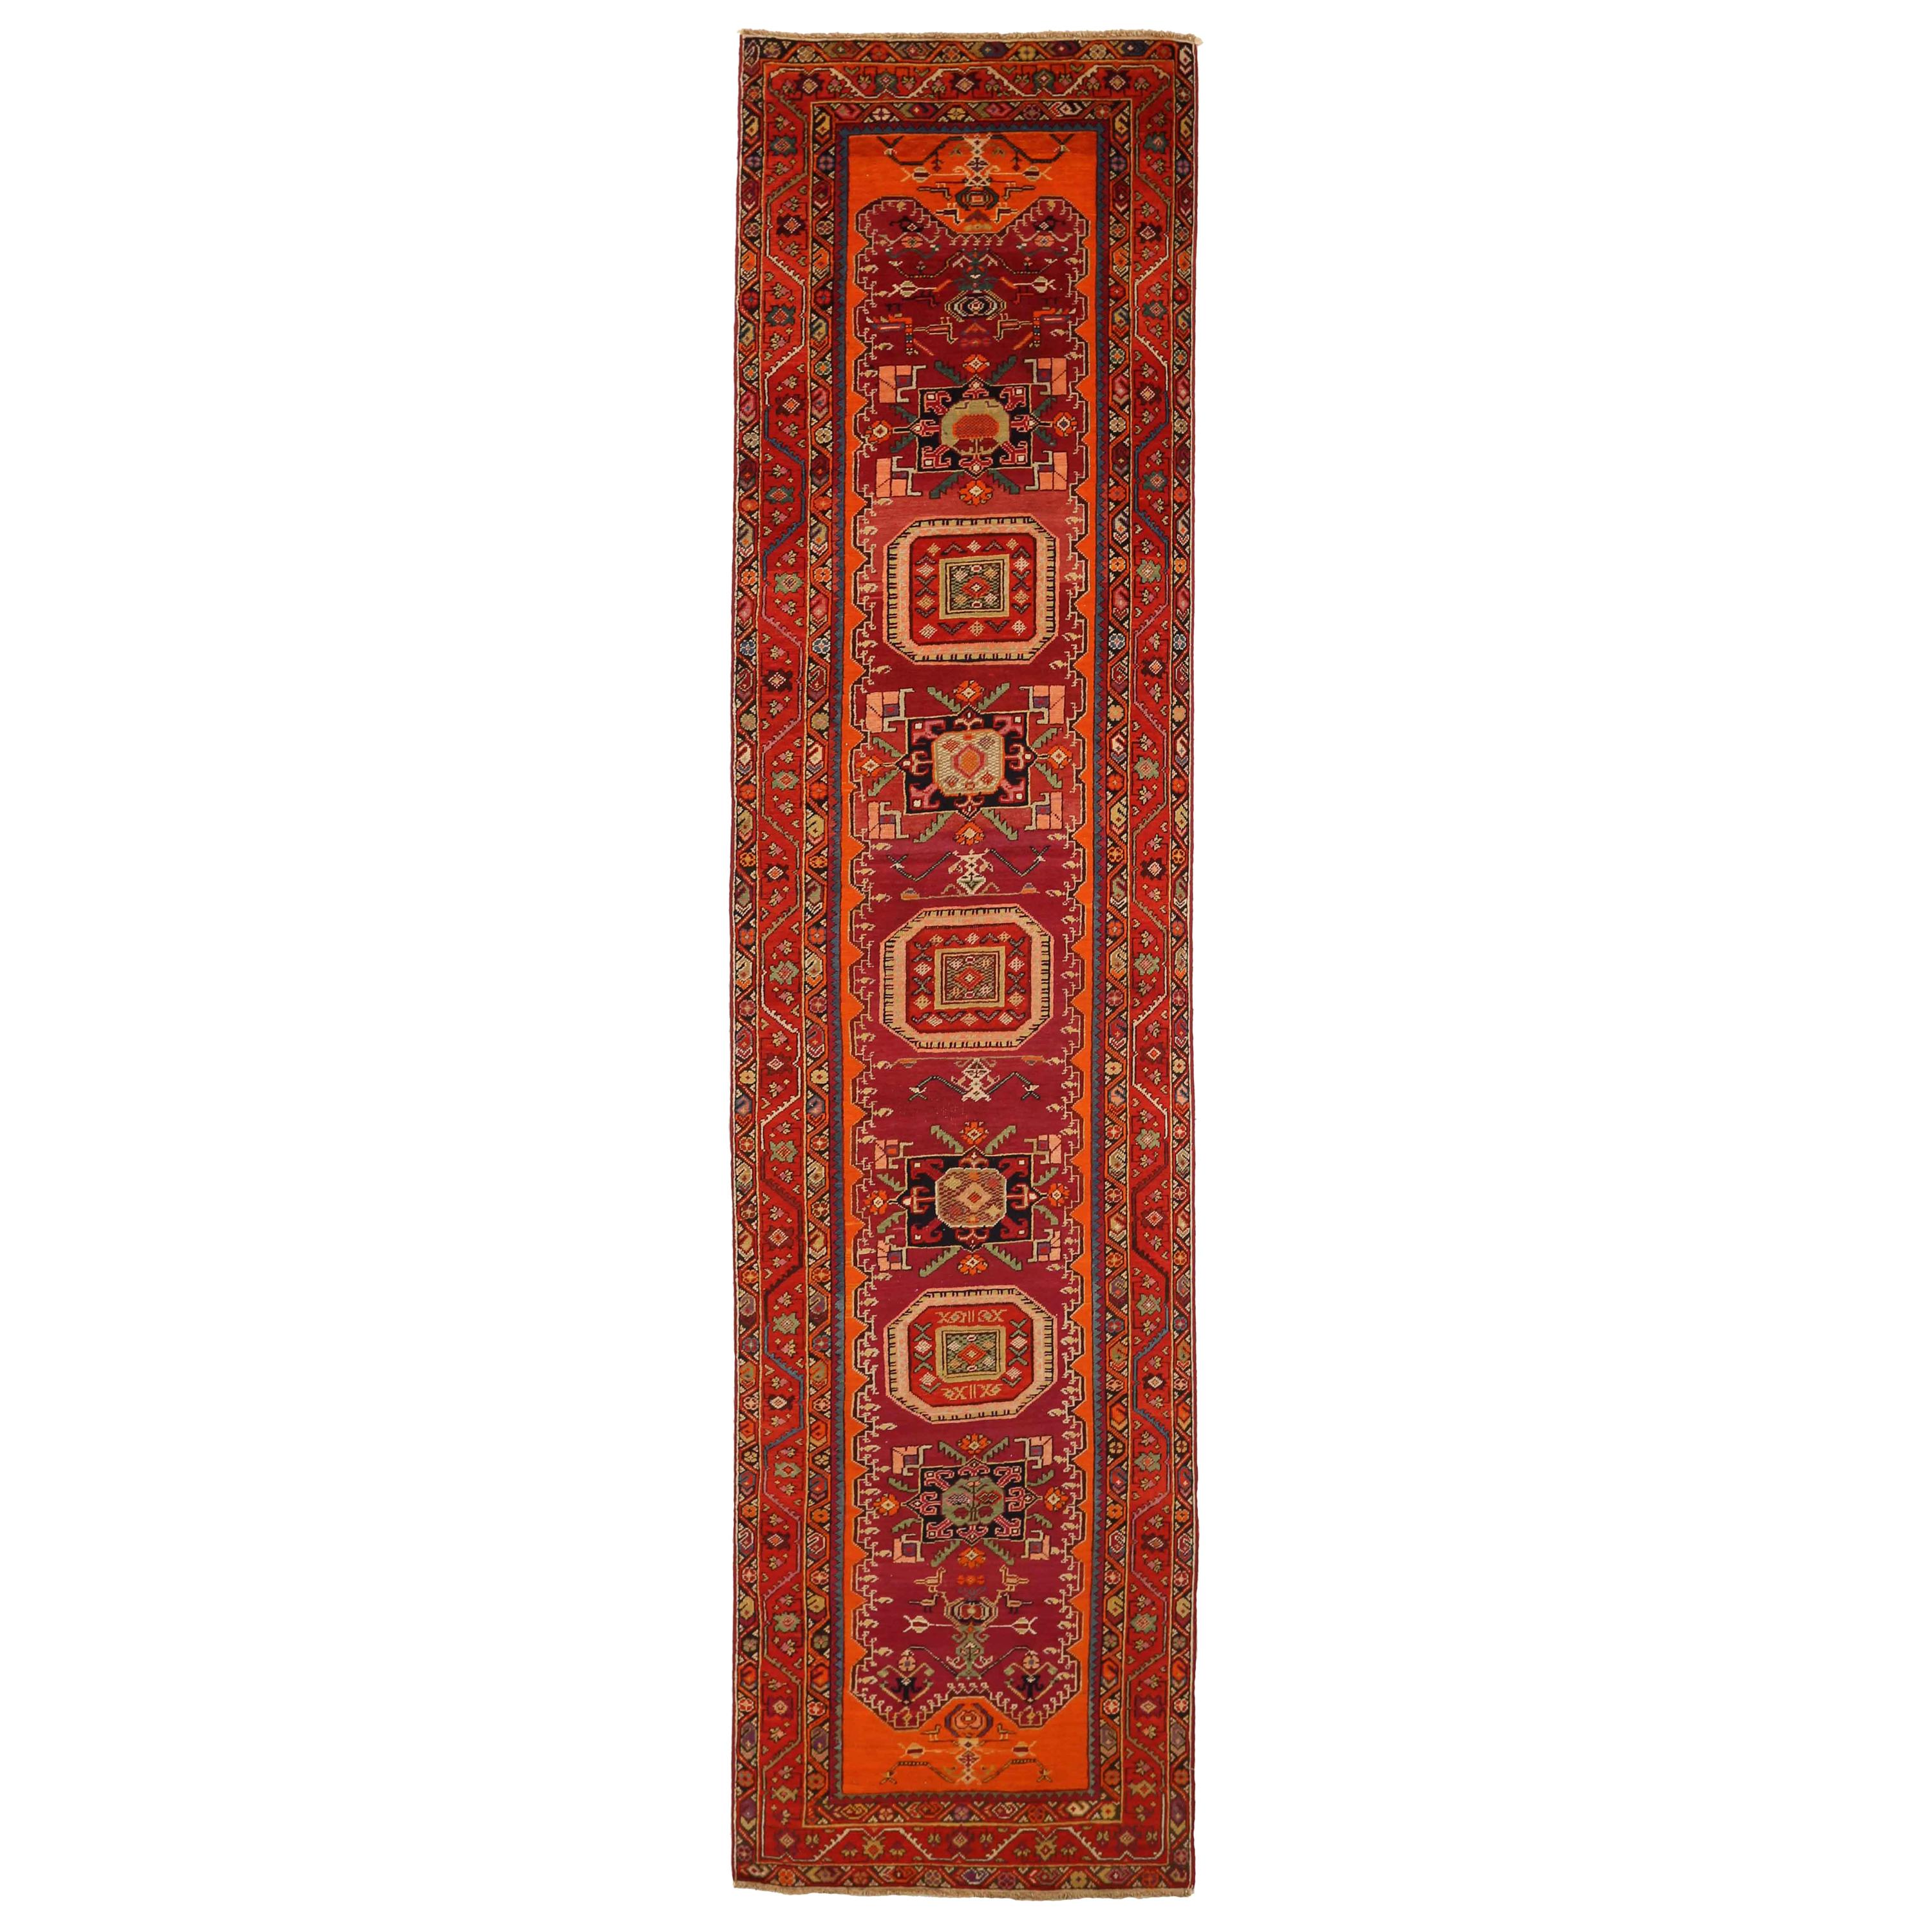 Twin Antique Persian Rug Karabagh Design with Gemstone Patterns, circa 1950s For Sale